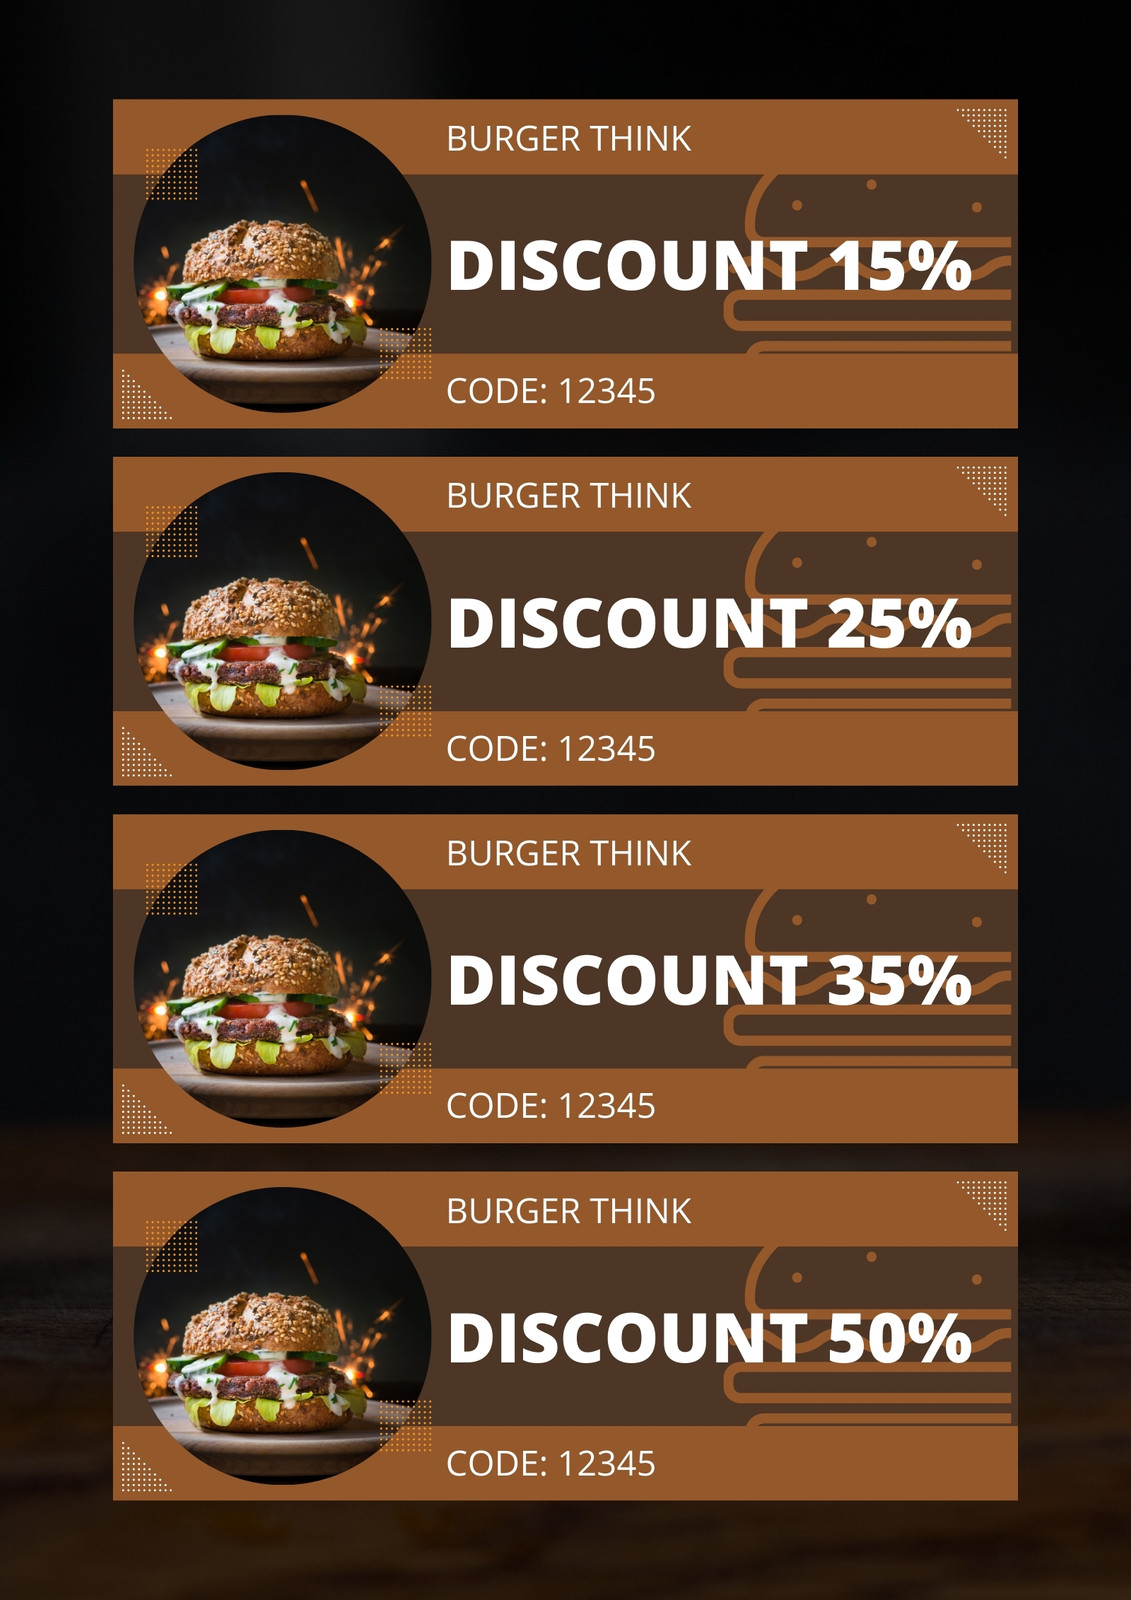 Discount codes for dining deals